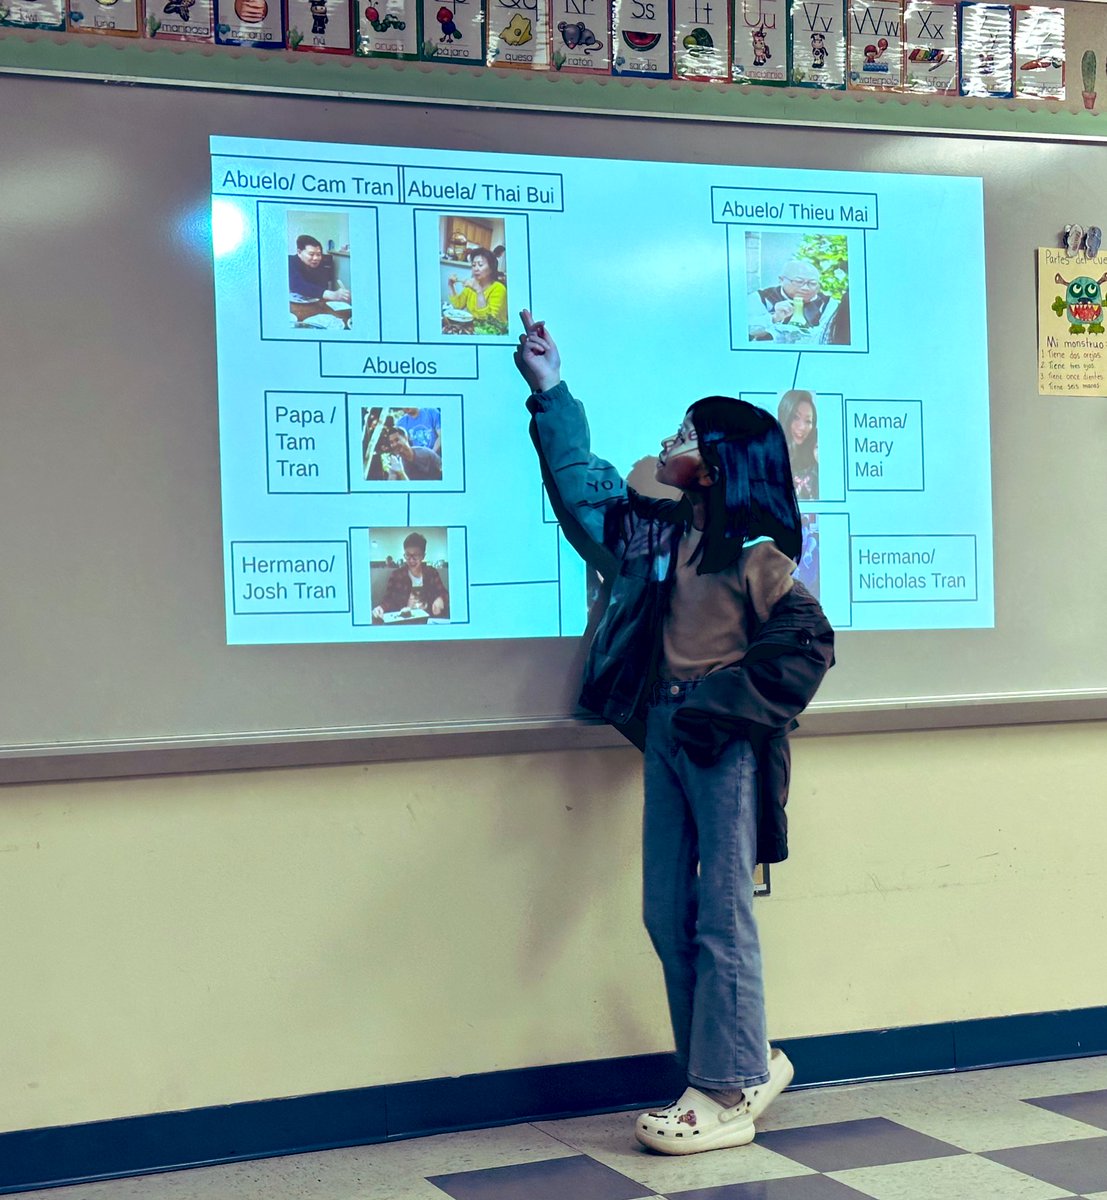 My 5th grade students have been working on oral presentations about their families. “MI FAMiLiA” Today they started presenting and I am super happy to hear them speak in Spanish! @thefarmbasd